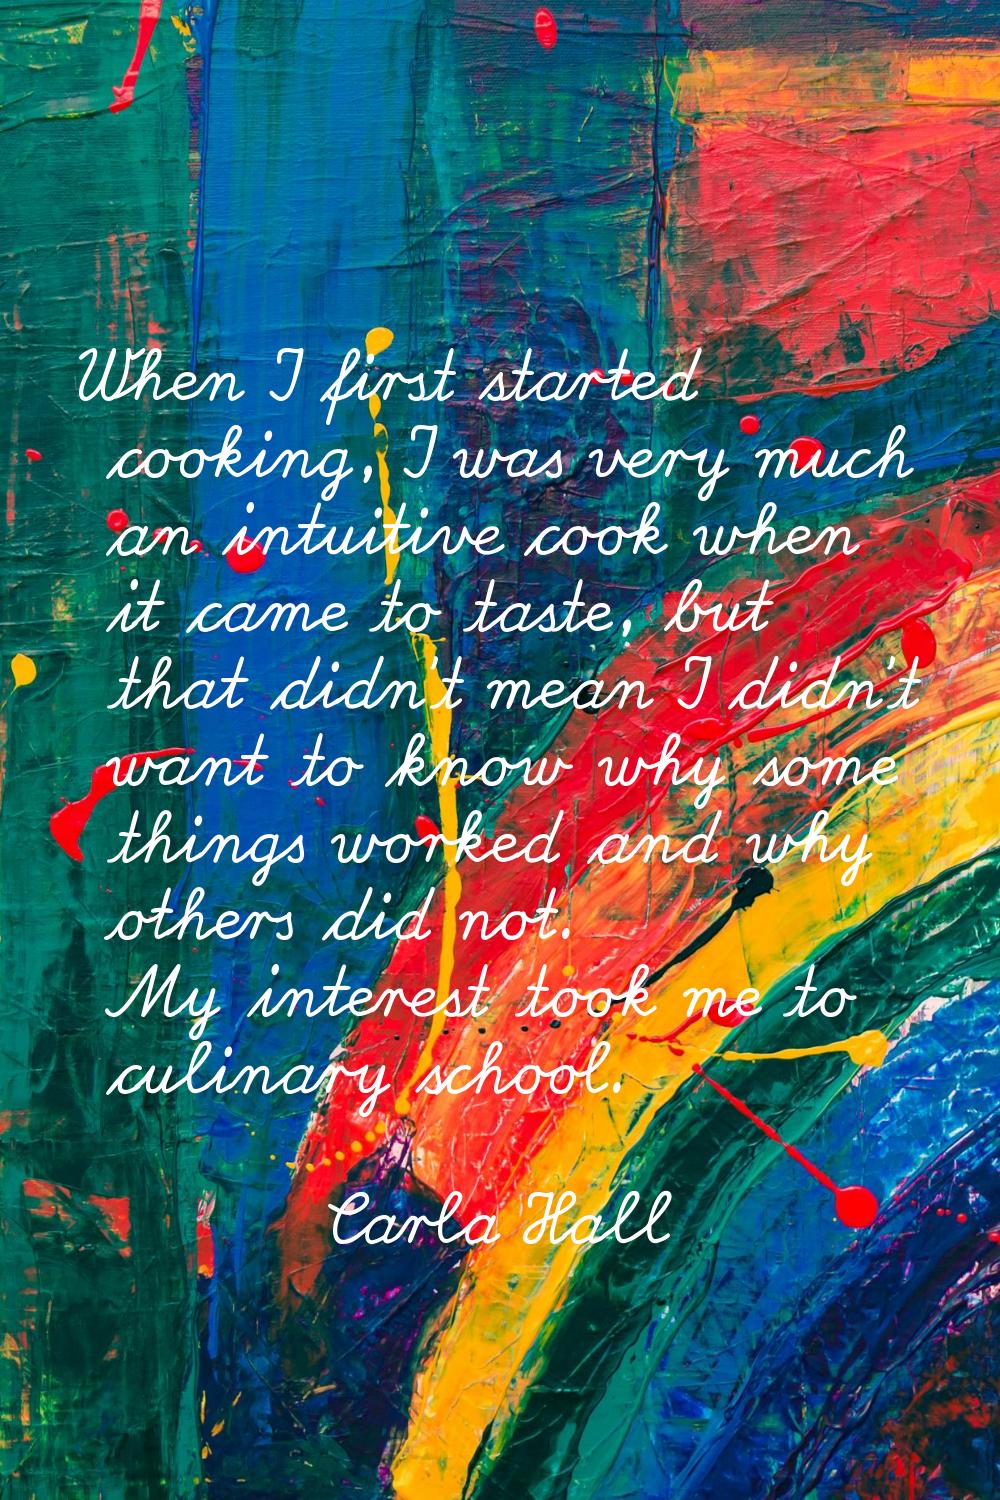 When I first started cooking, I was very much an intuitive cook when it came to taste, but that did